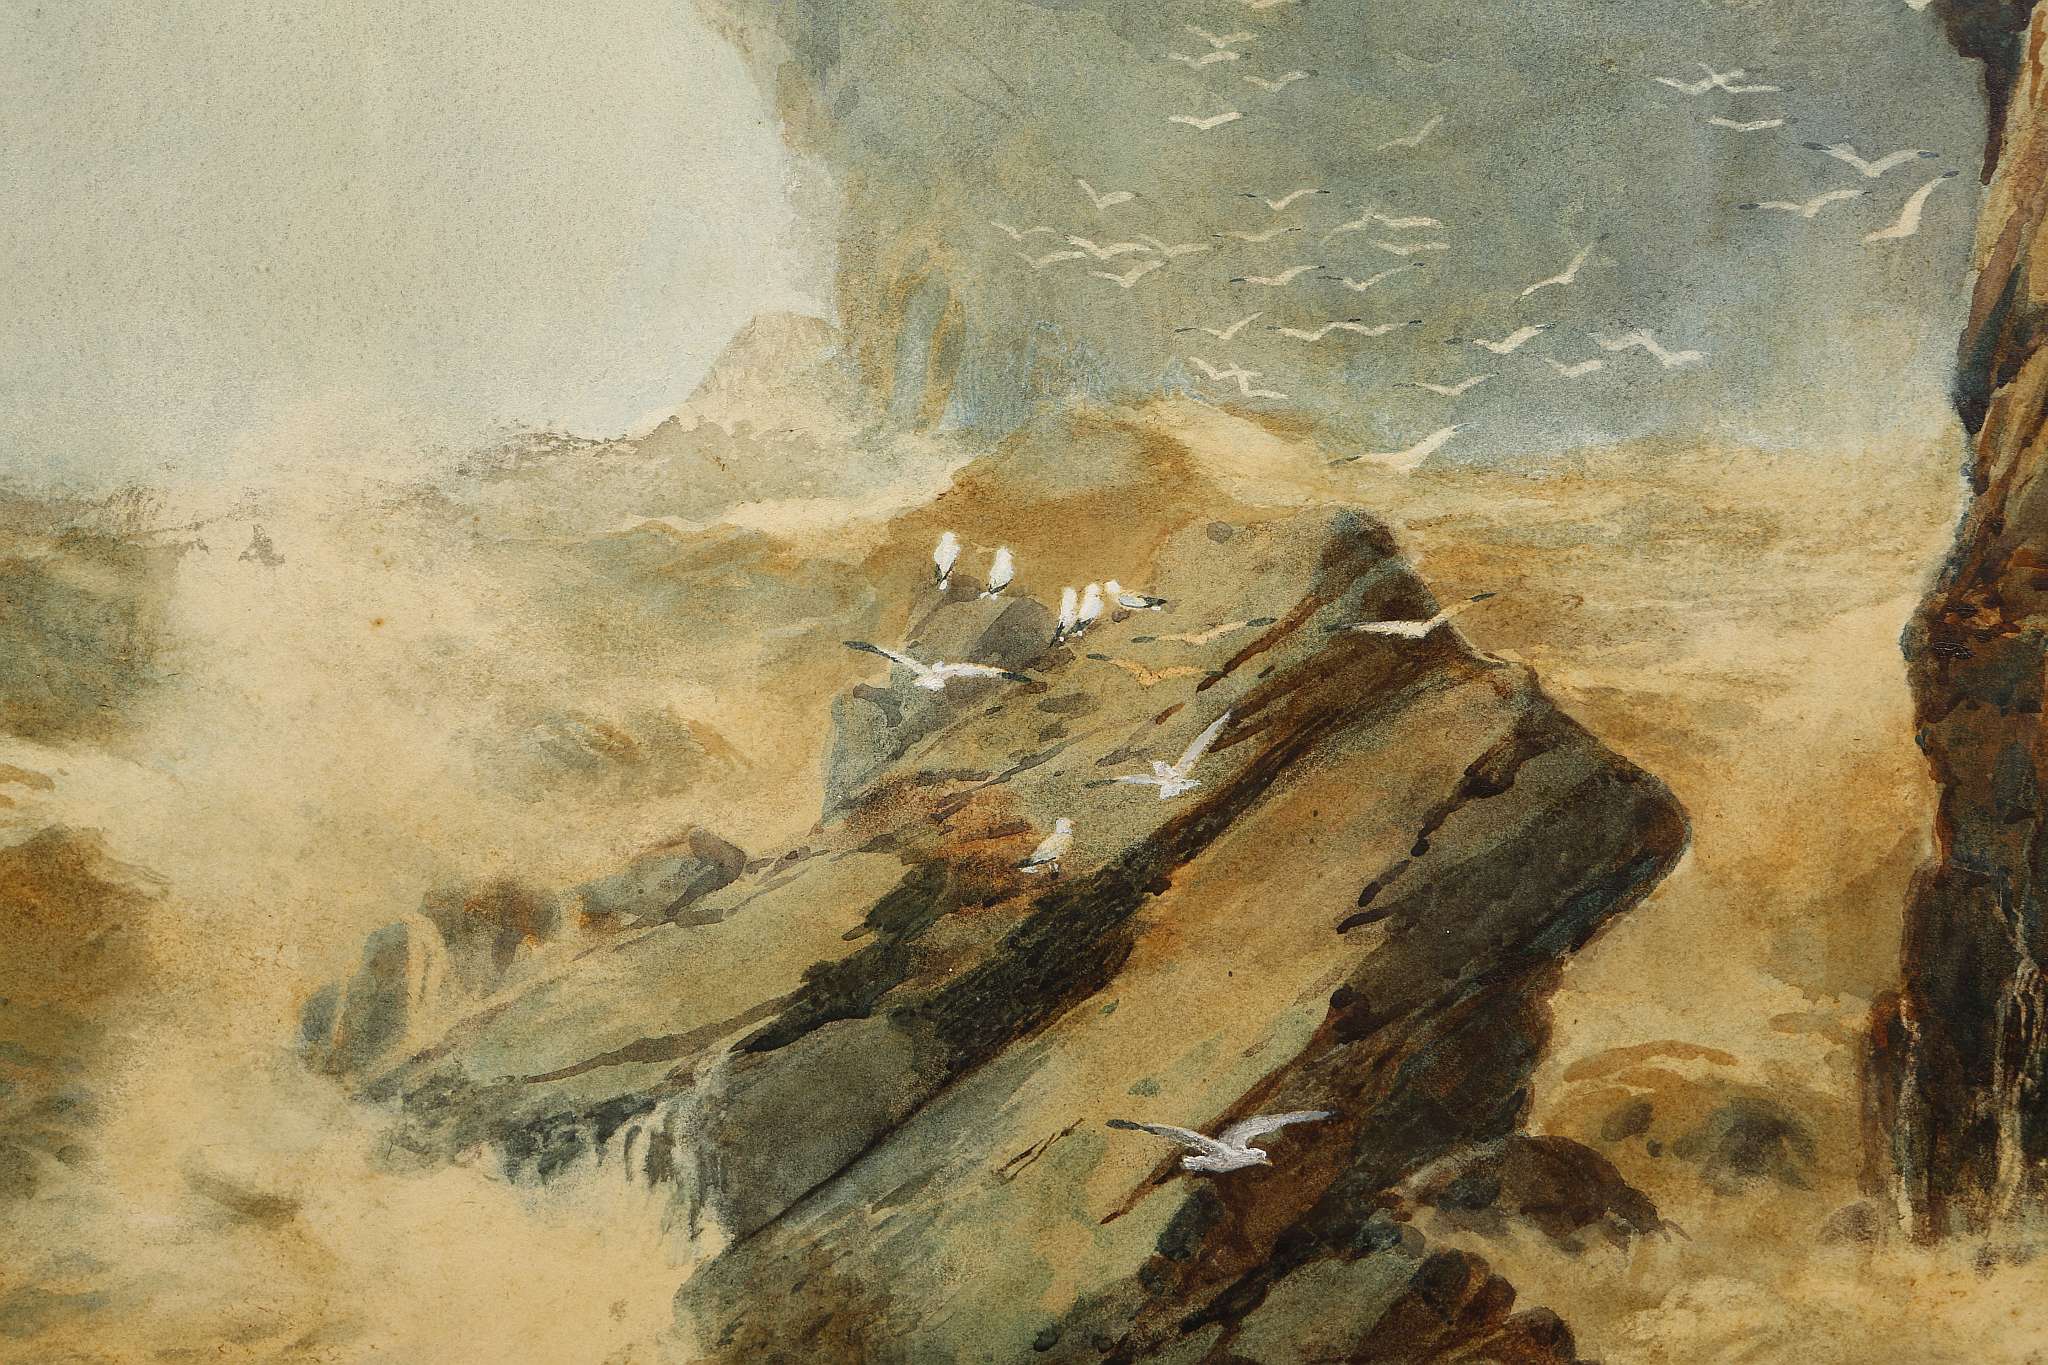 Reginald Smith 1855-1925, 'Sea Cliffs', a large marine watercolour showing crashing waves and bird - Image 2 of 7